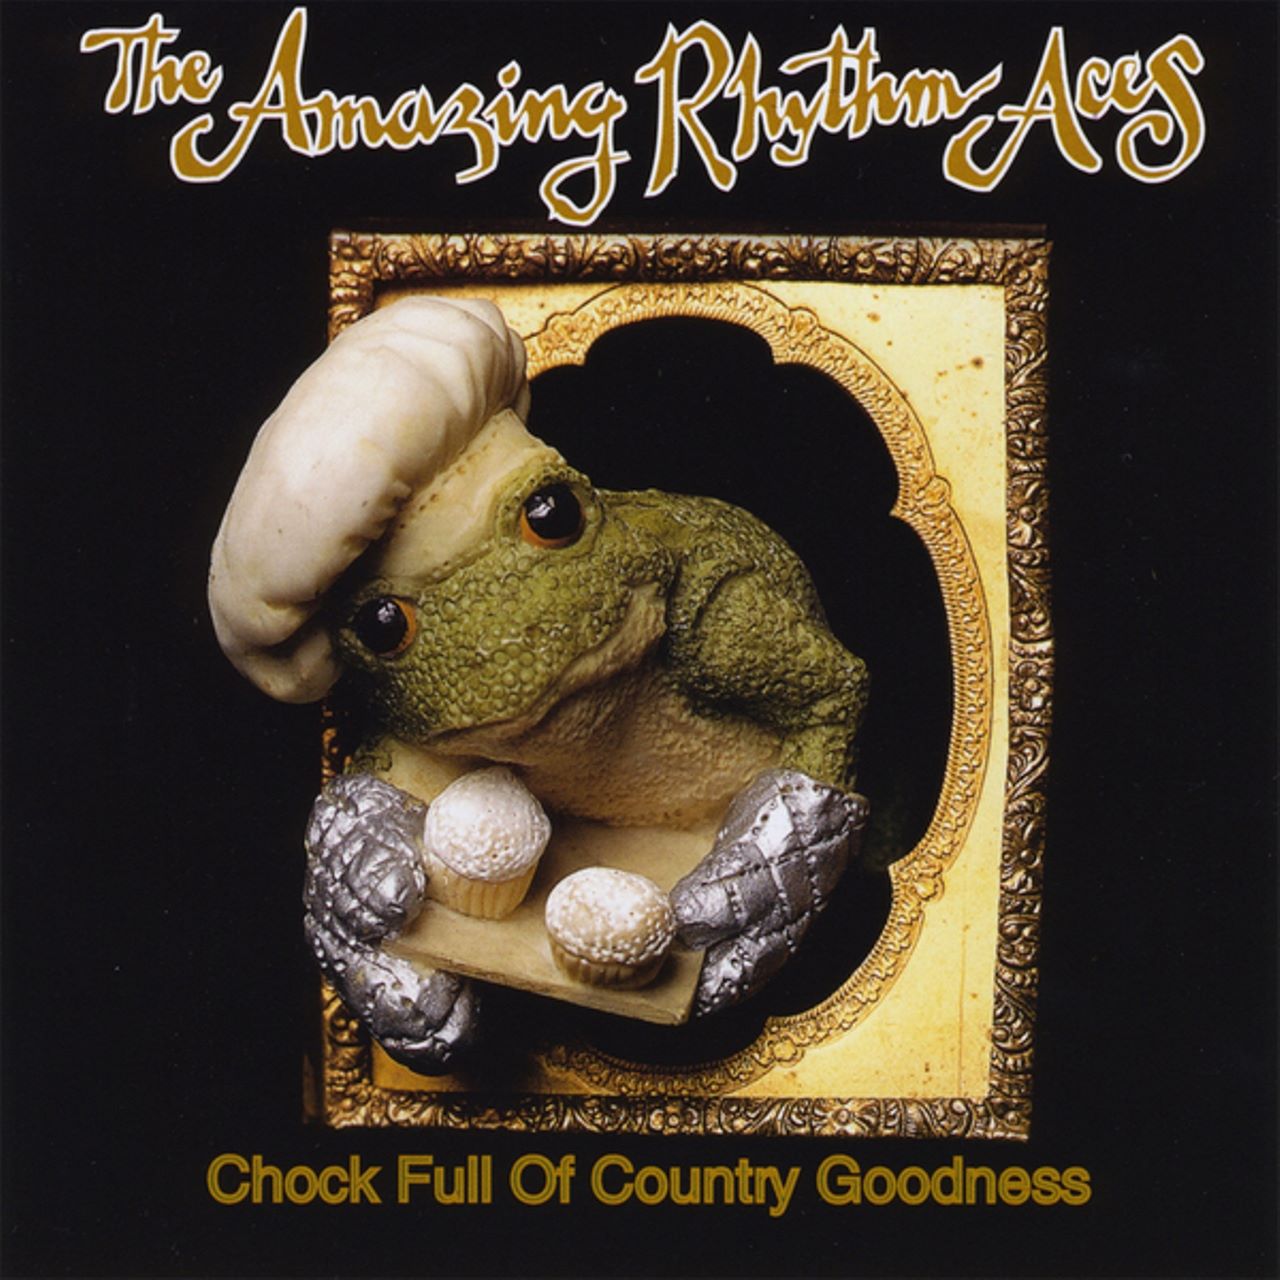 Amazing Rhythm Aces - Chock Full Of Country Goodness cover album